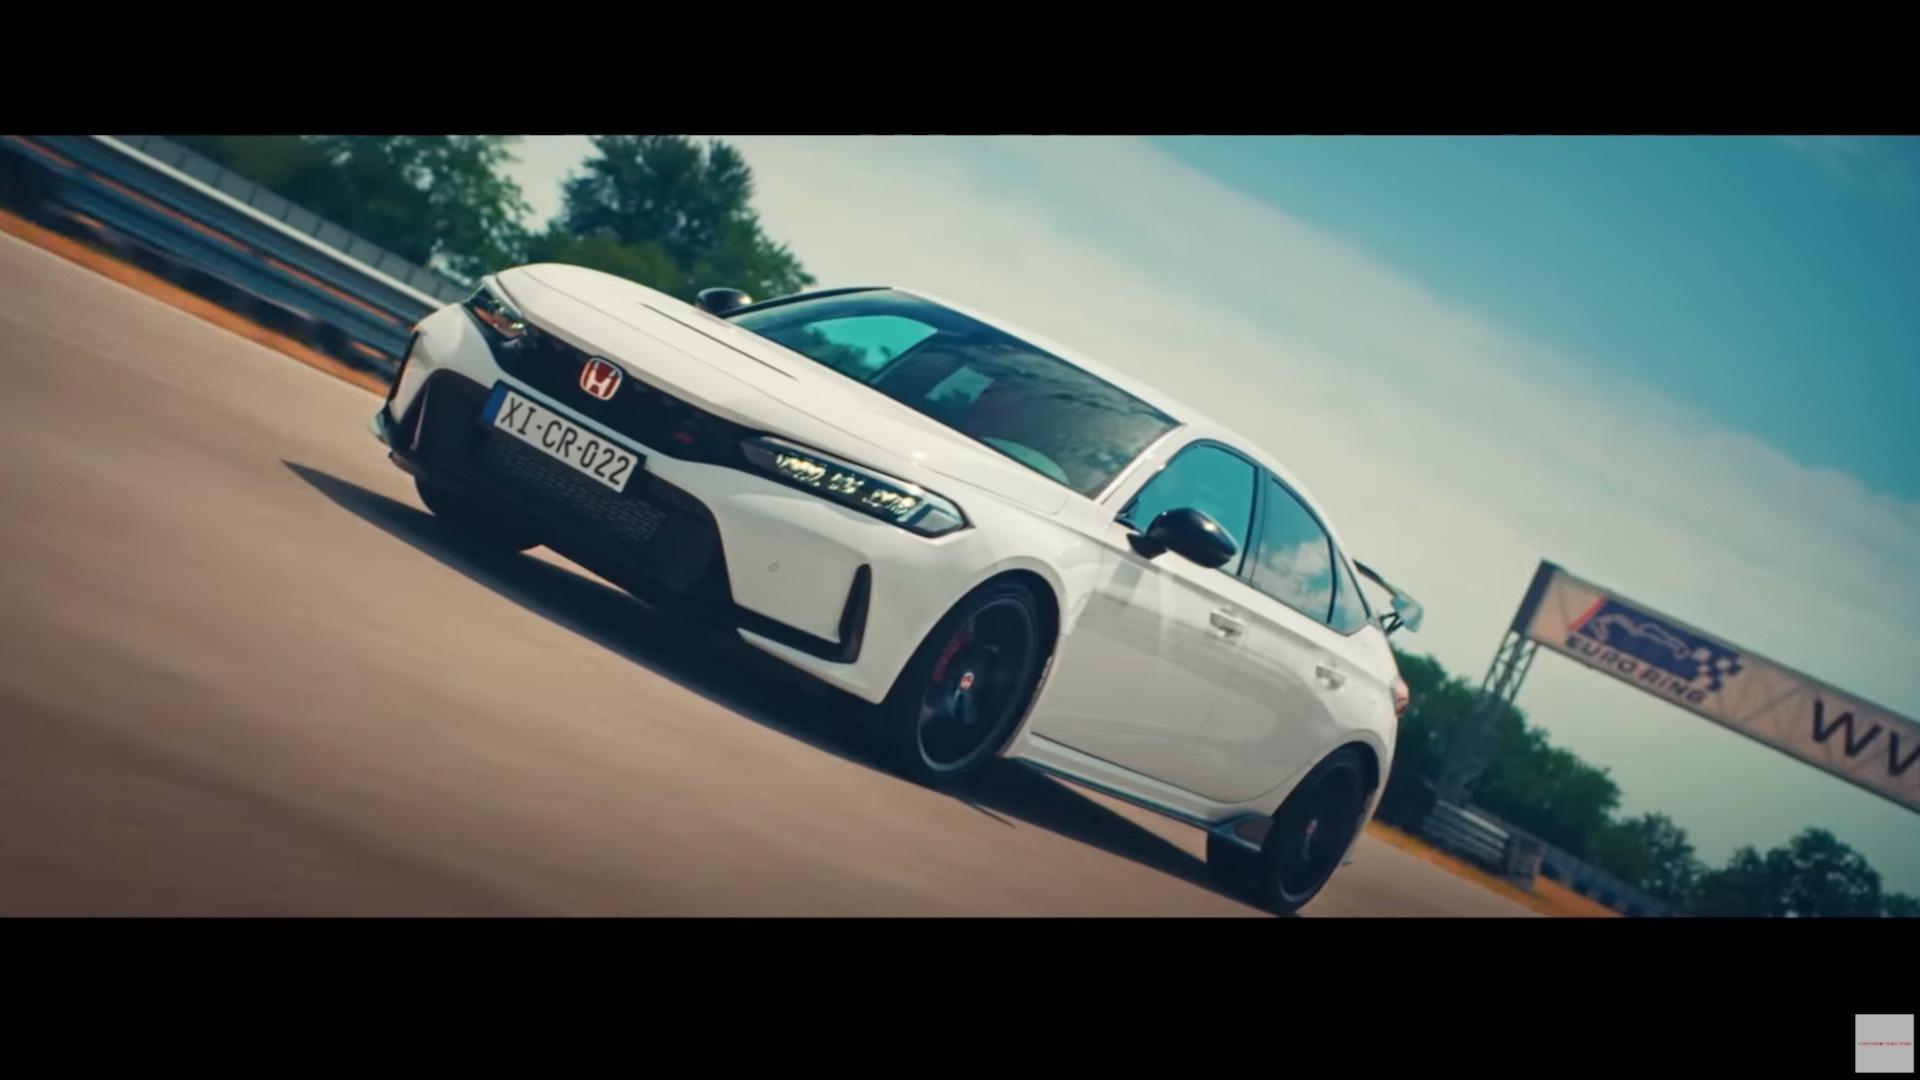 Max Verstappen drives the 2023 Honda Civic Type R in ad.